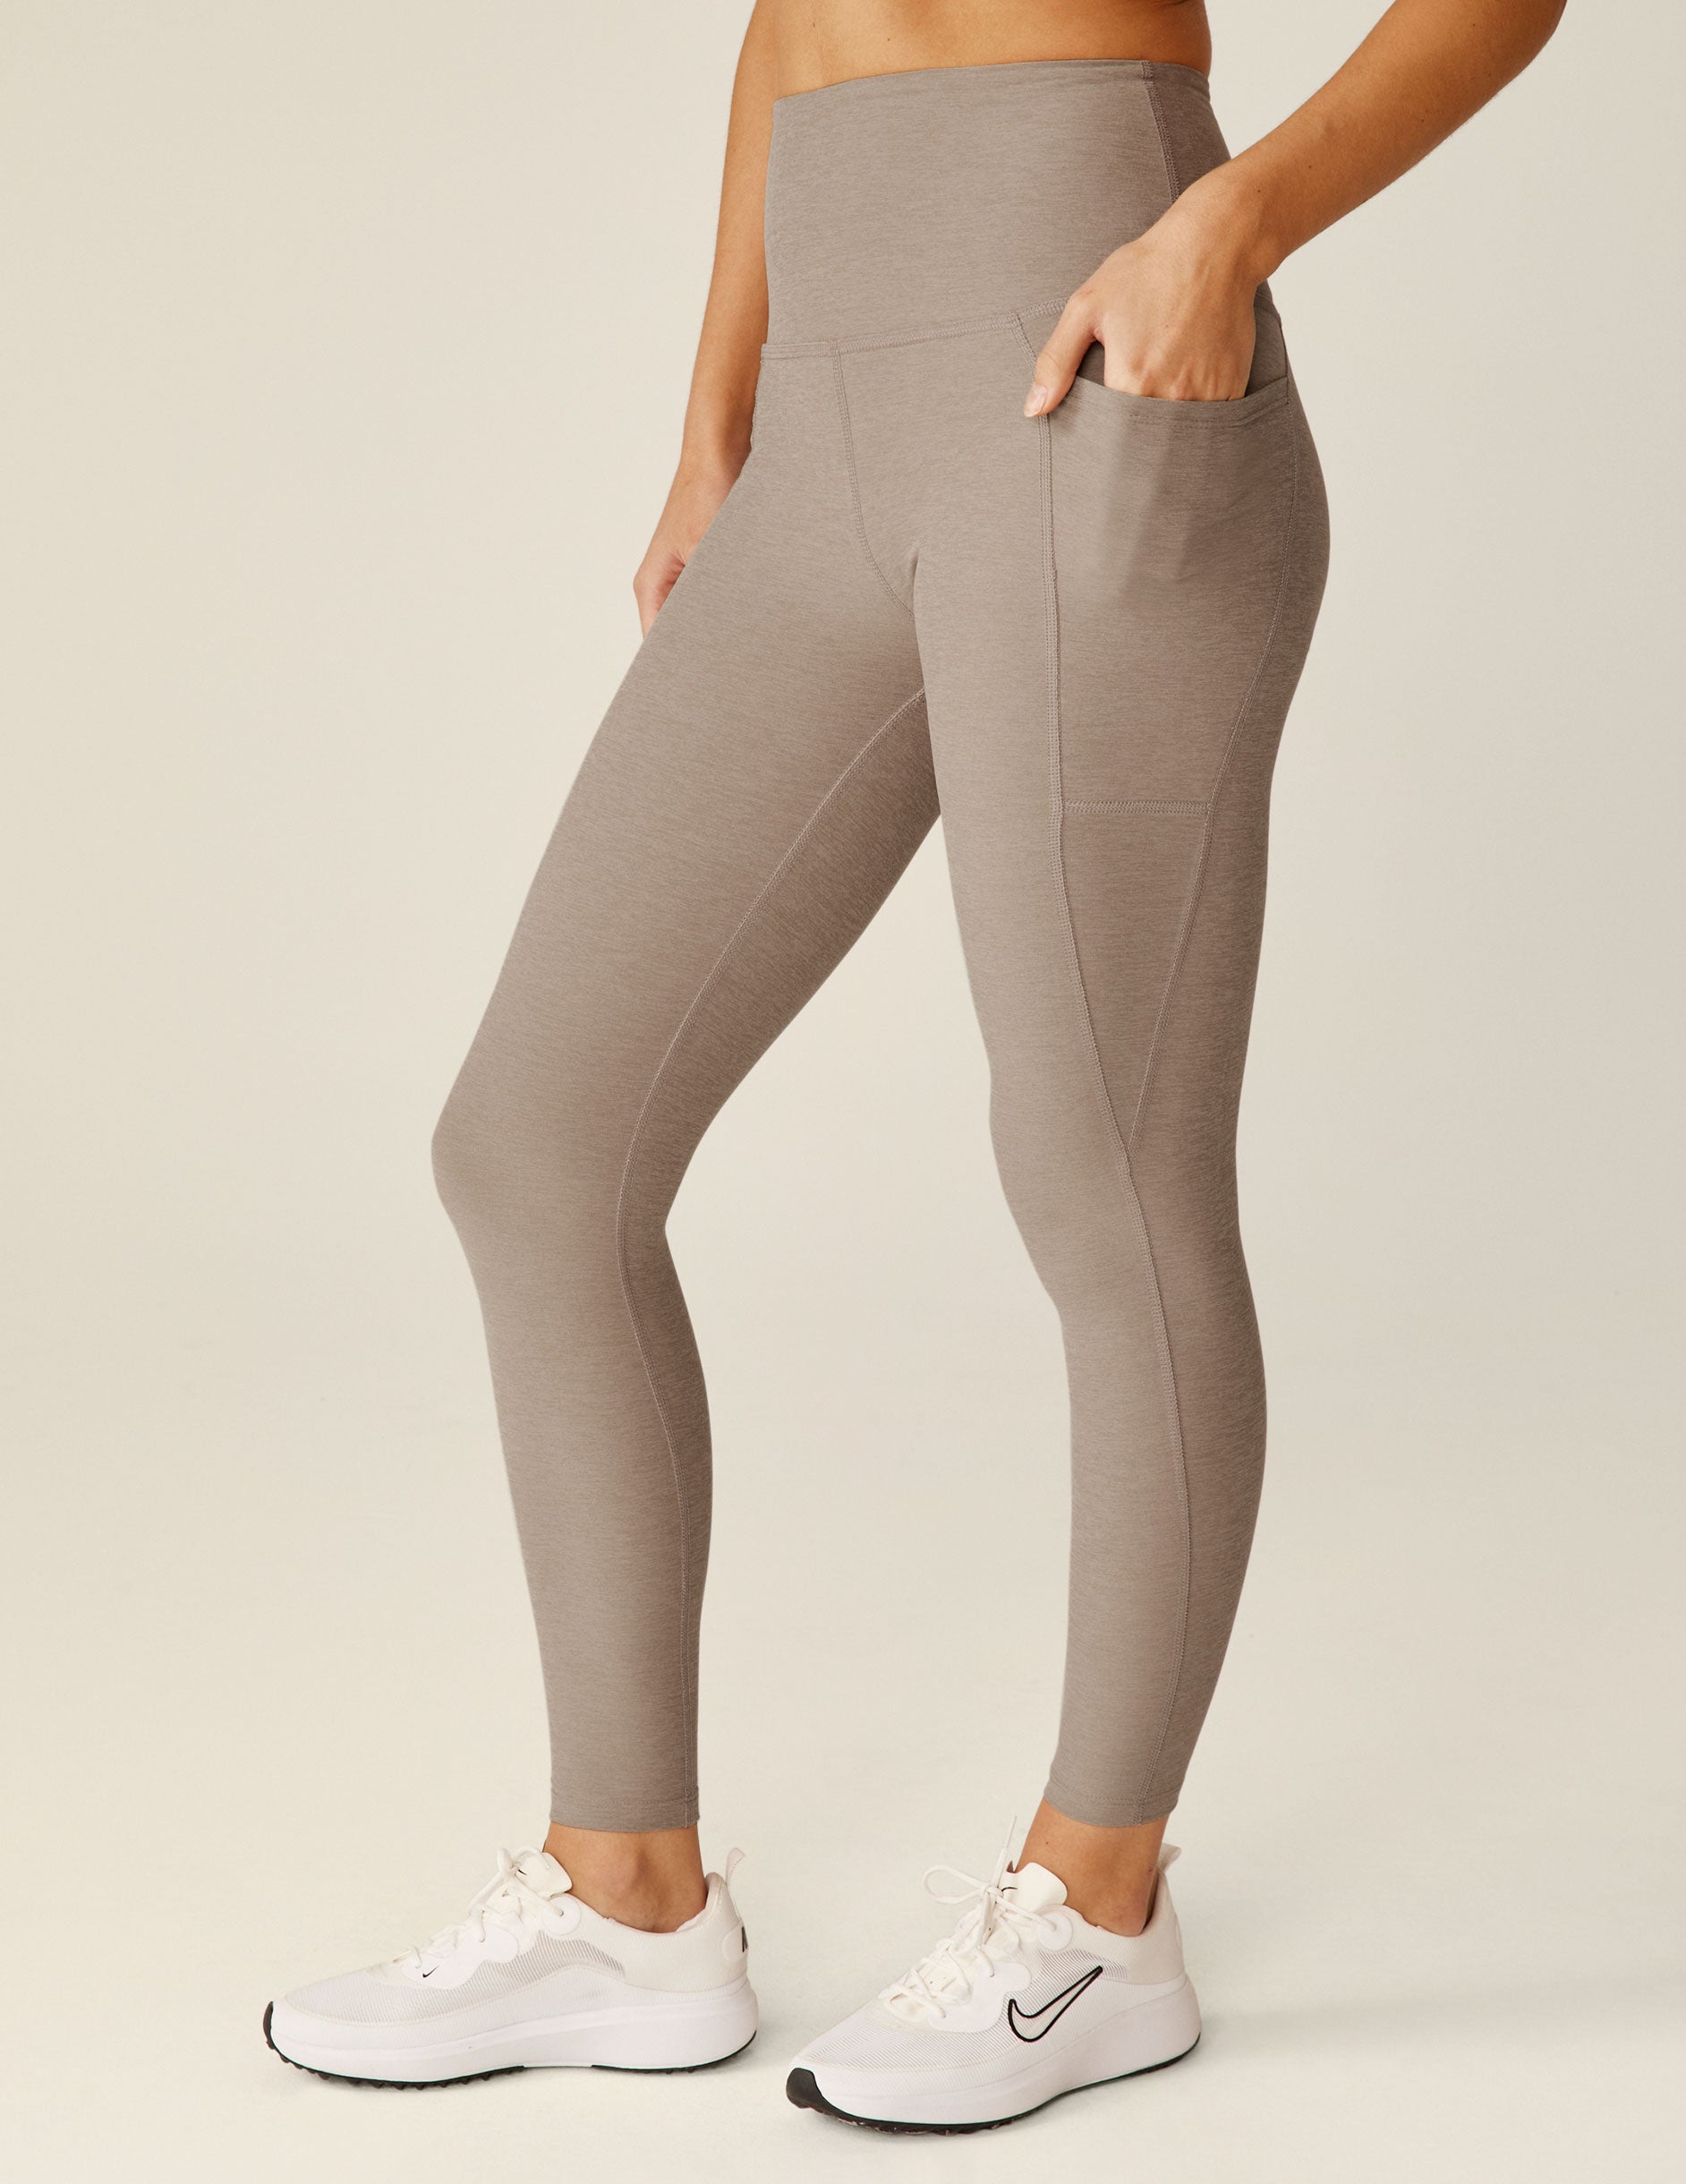 Beyond Yoga, Pants & Jumpsuits, Spacedye Out Of Pocket High Waisted Midi Legging  Xs